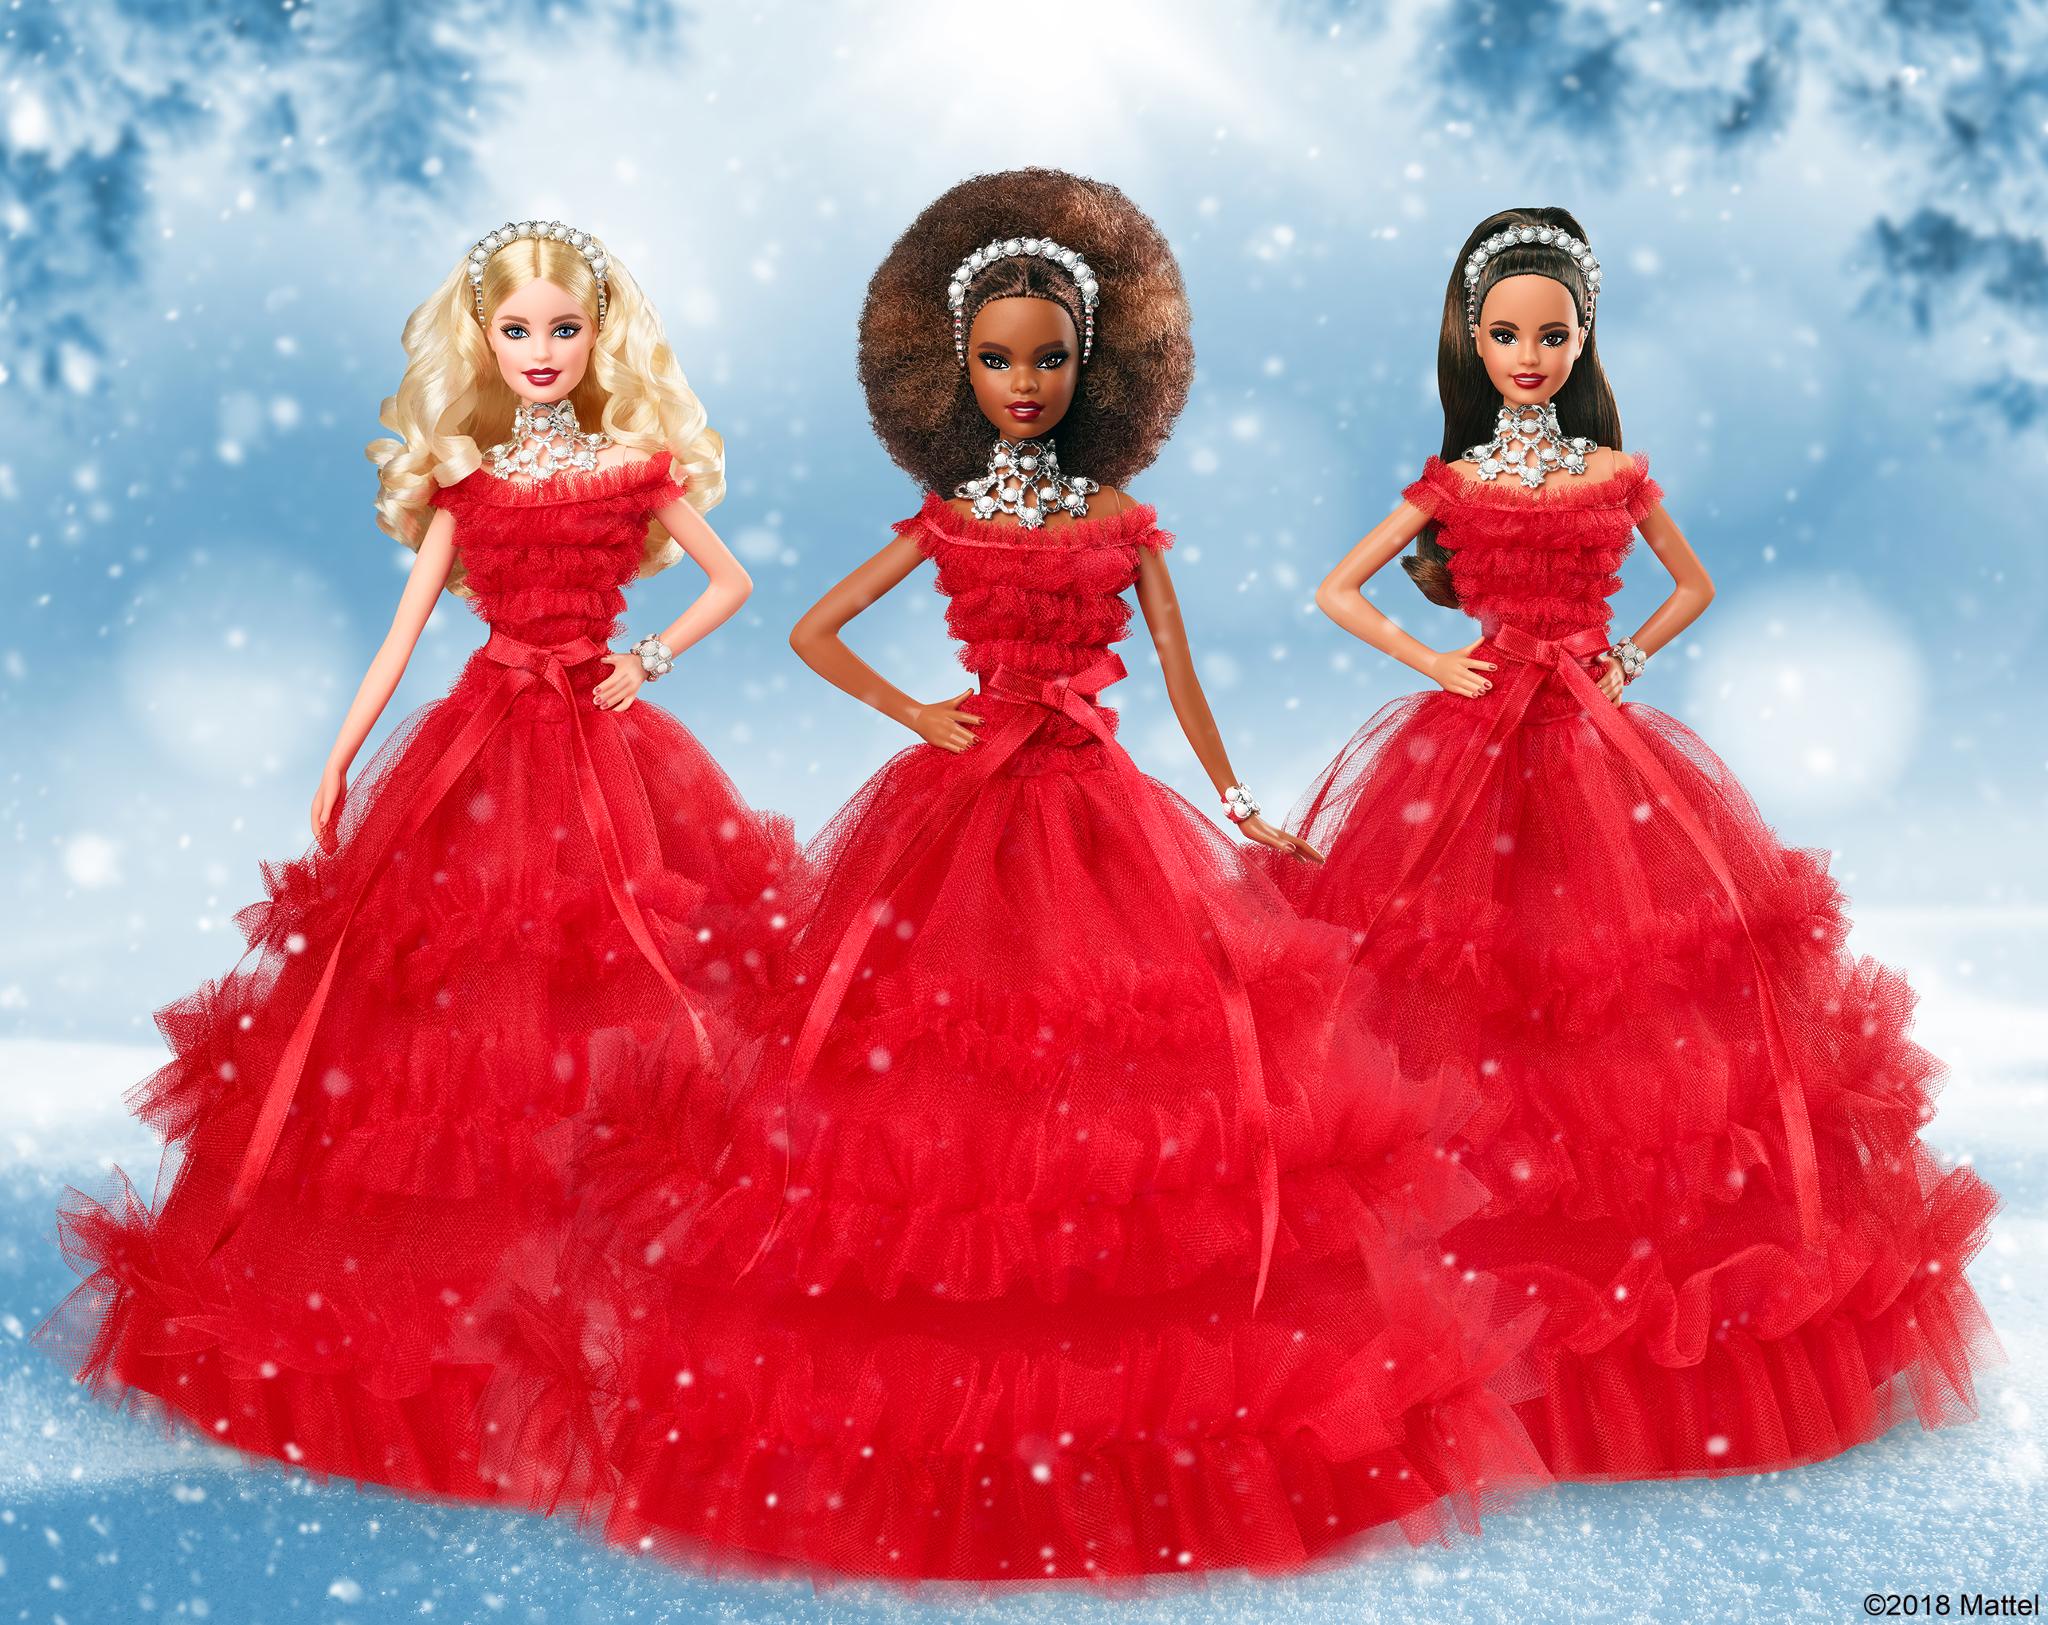 Eik gewoontjes Nutteloos Barbie on Twitter: "We're celebrating the 30th anniversary of the Holiday # Barbie Doll by paying homage to the original! Dressed in an elegant red  gown &amp; accessorized with 30 pearls, the 2018